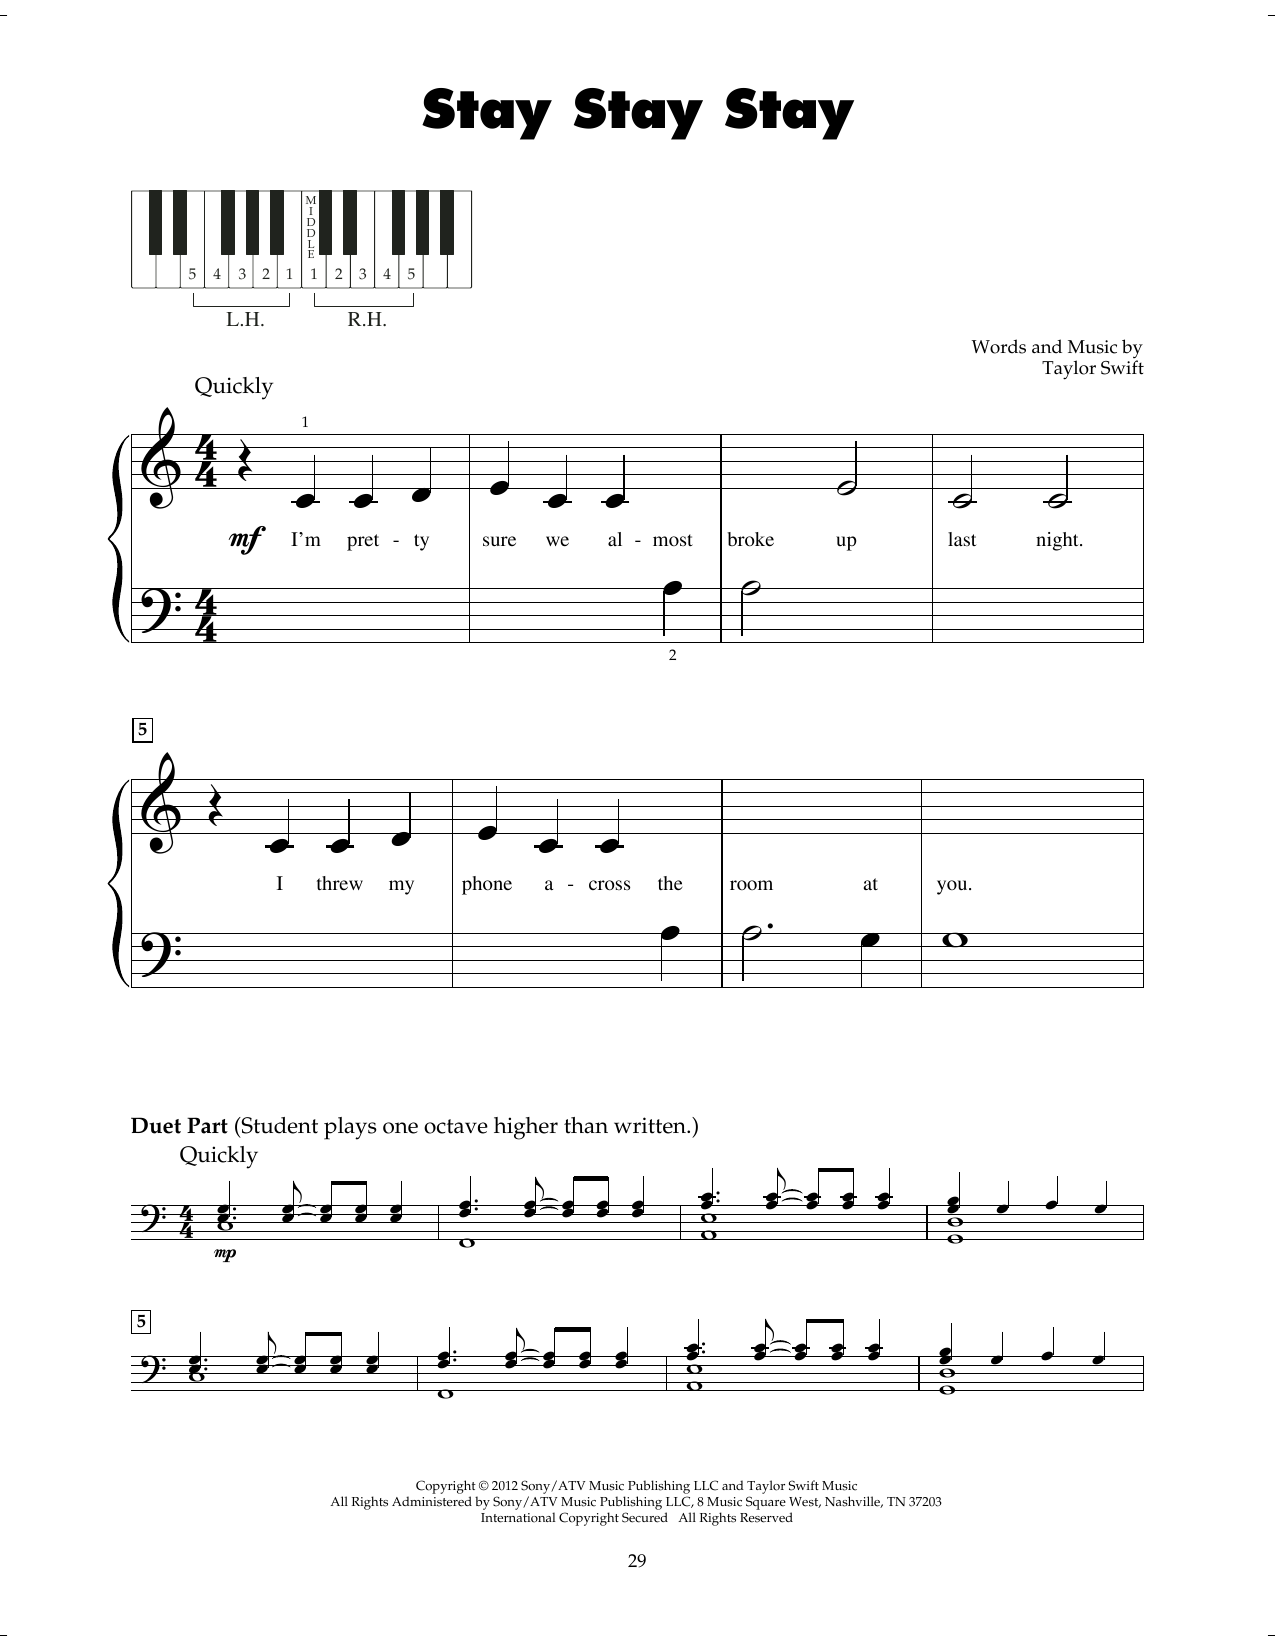 Download Taylor Swift Stay Stay Stay Sheet Music